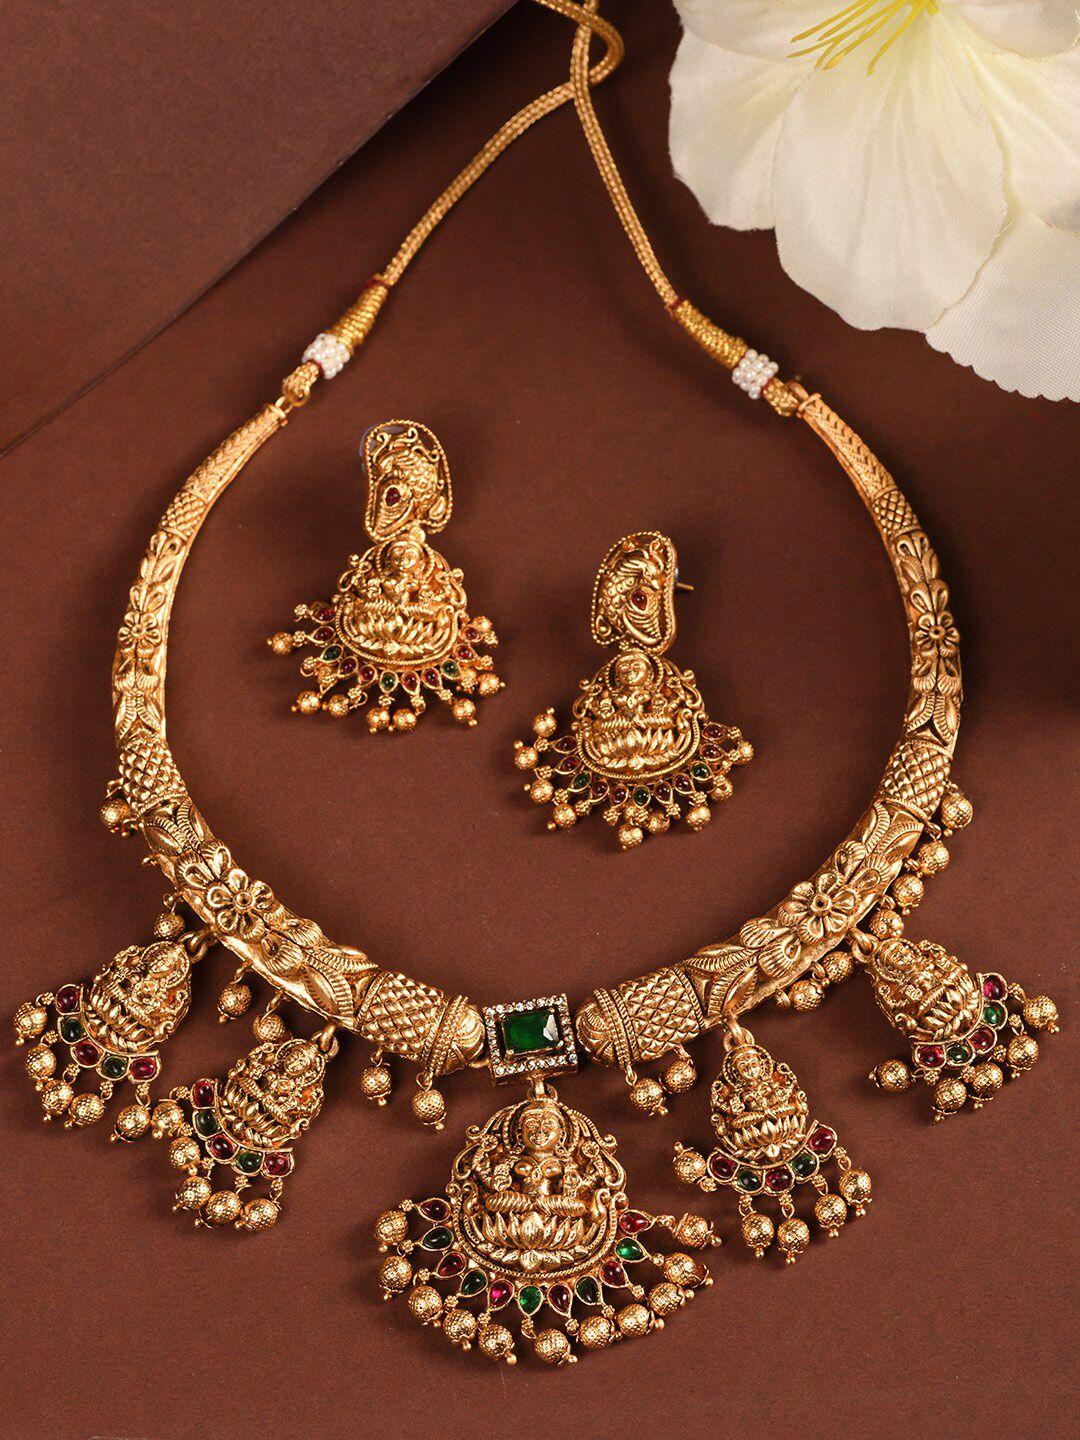 saraf rs jewellery gold-plated cz-studded & beaded temple necklace and earrings